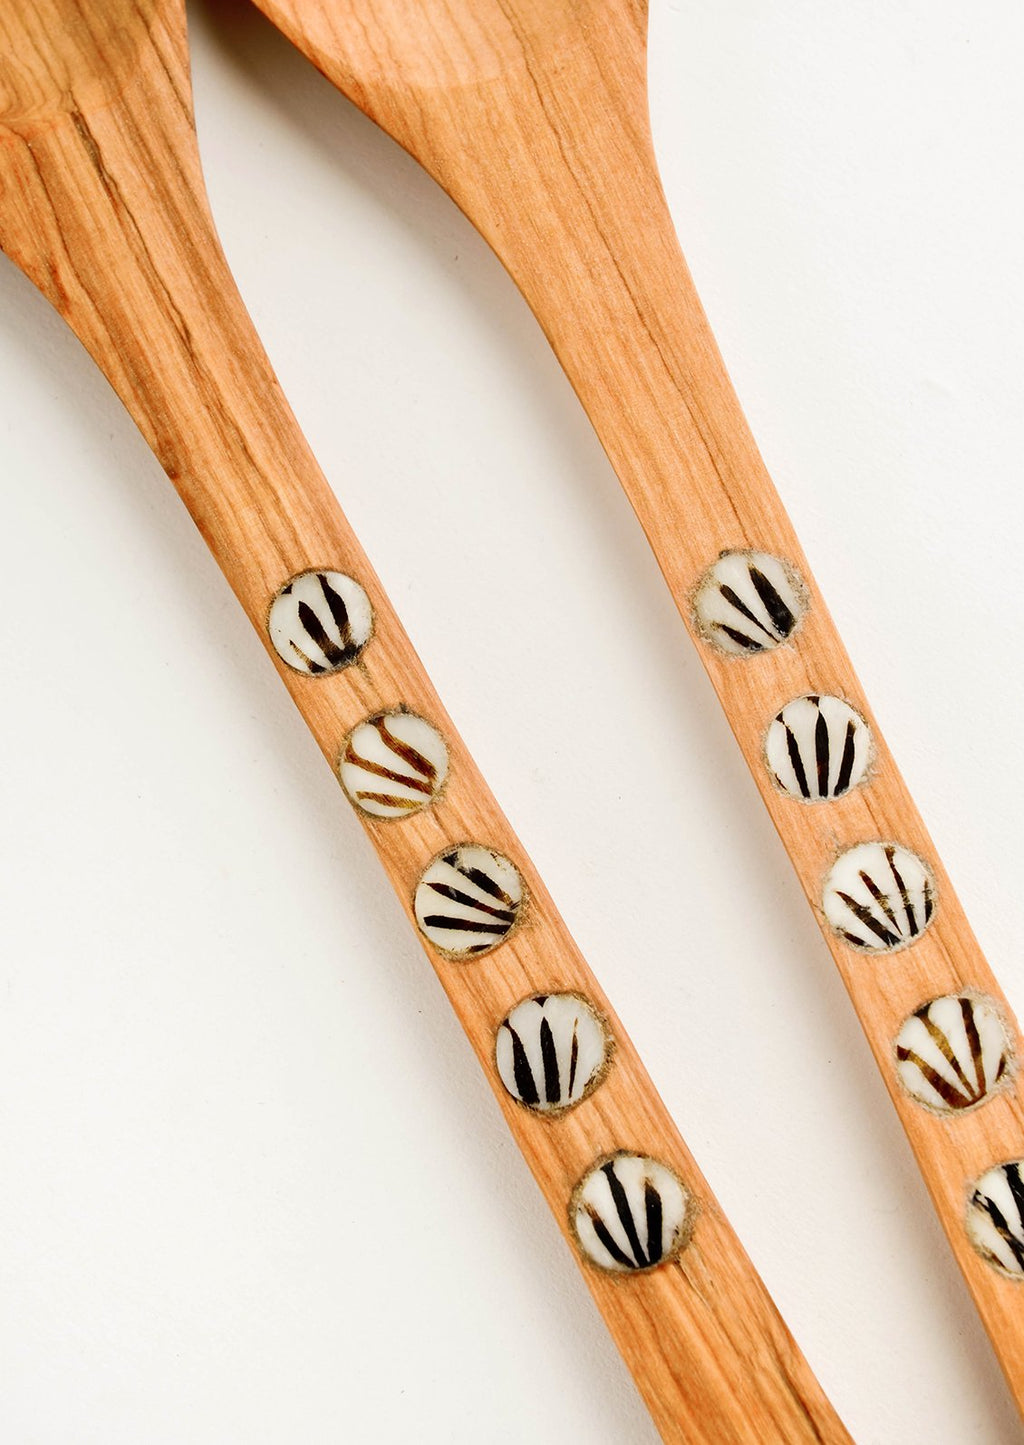 3: Detail of round, patterned bone inlay on spoon handles